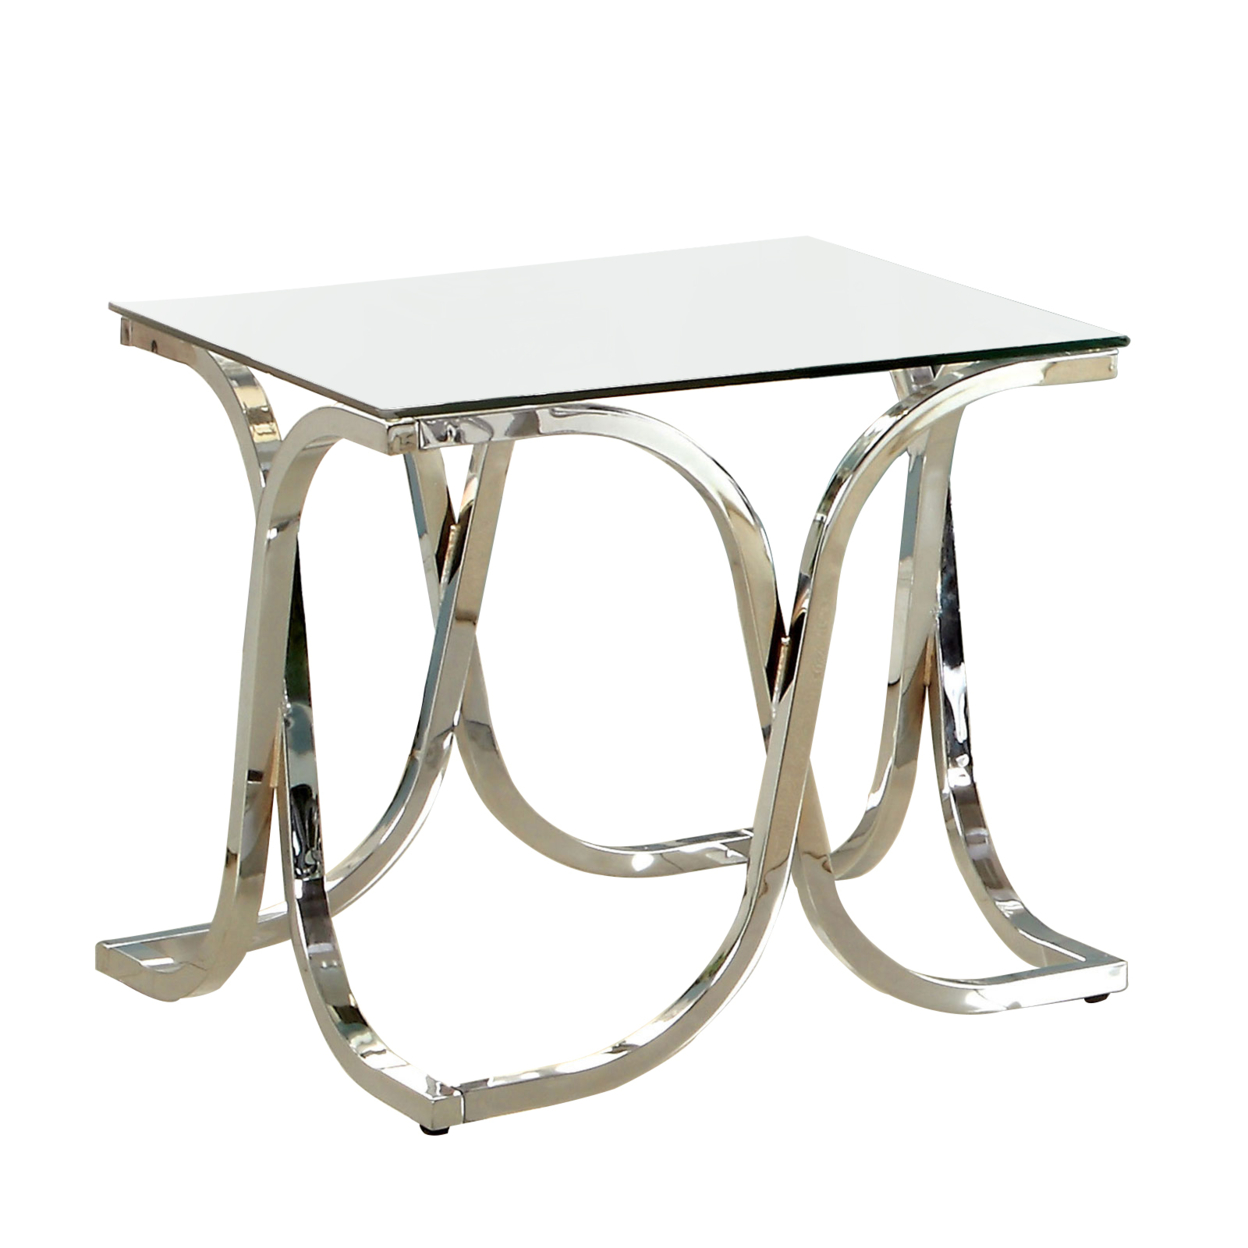 Modern End Table With Glass Top And Curved Chrome Legs, Silver And Clear- Saltoro Sherpi